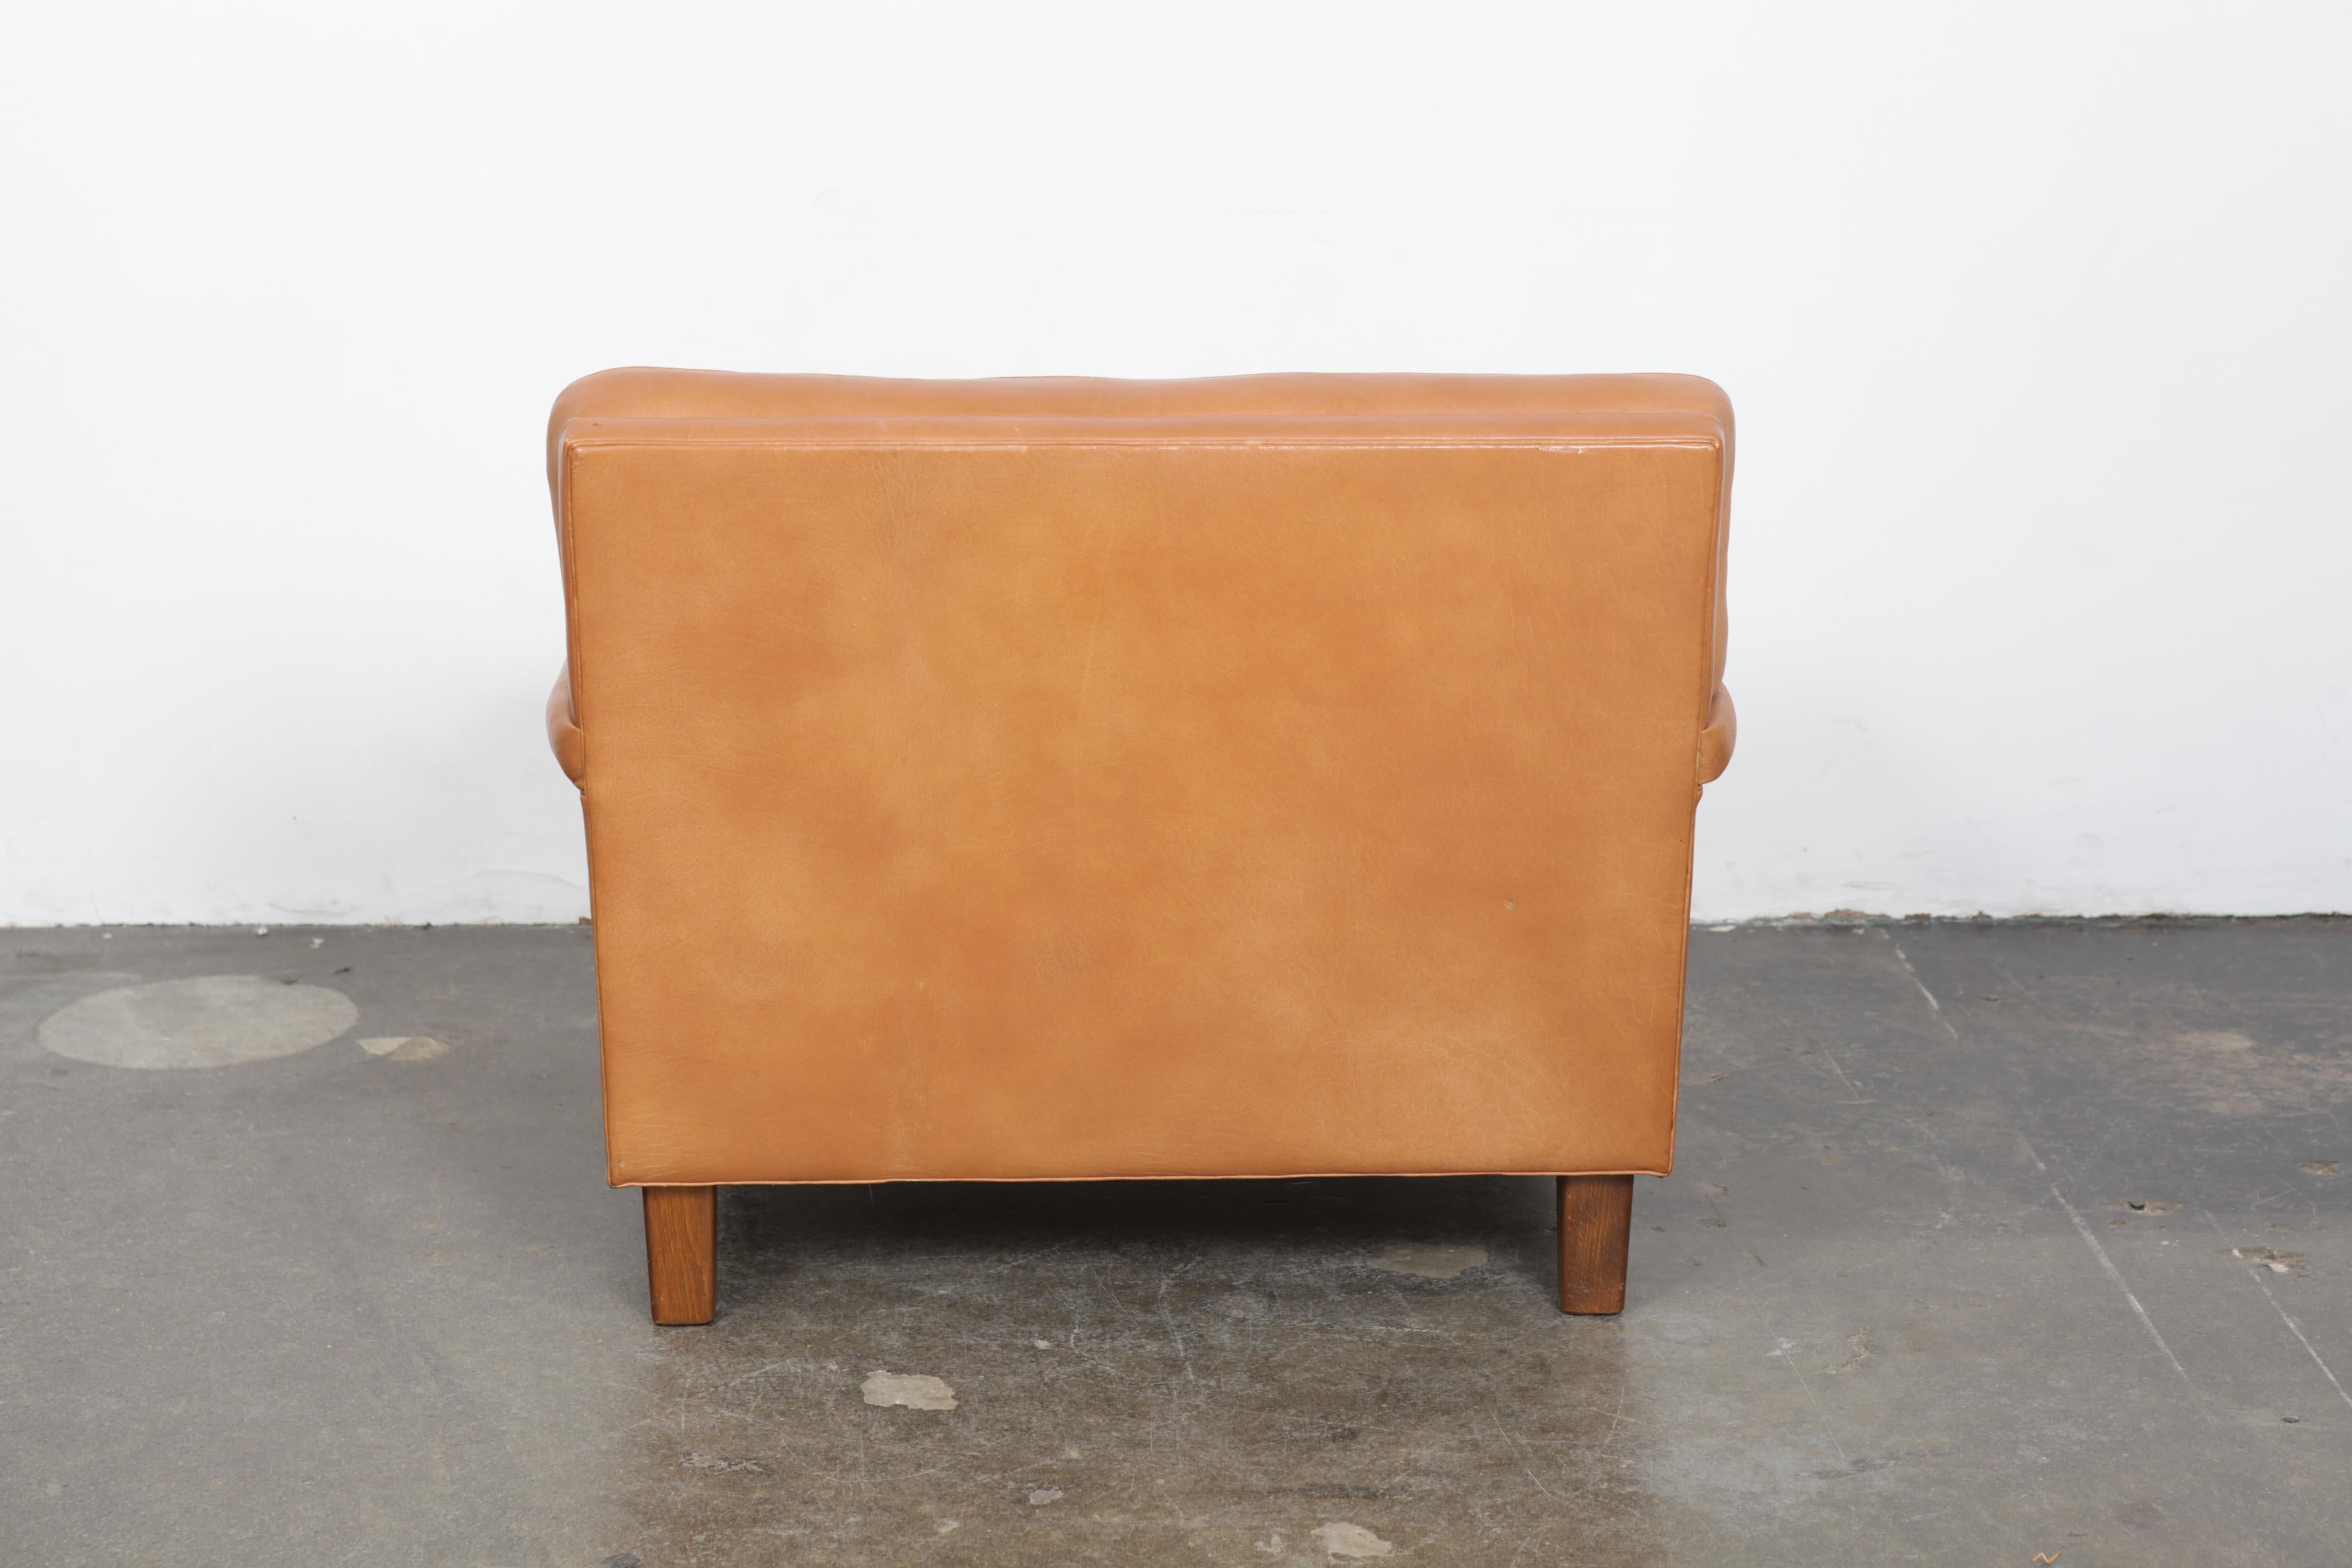 Swedish Arne Norell Merkur Tan Leather Tufted Lounge Chair, Sweden, Norell AB